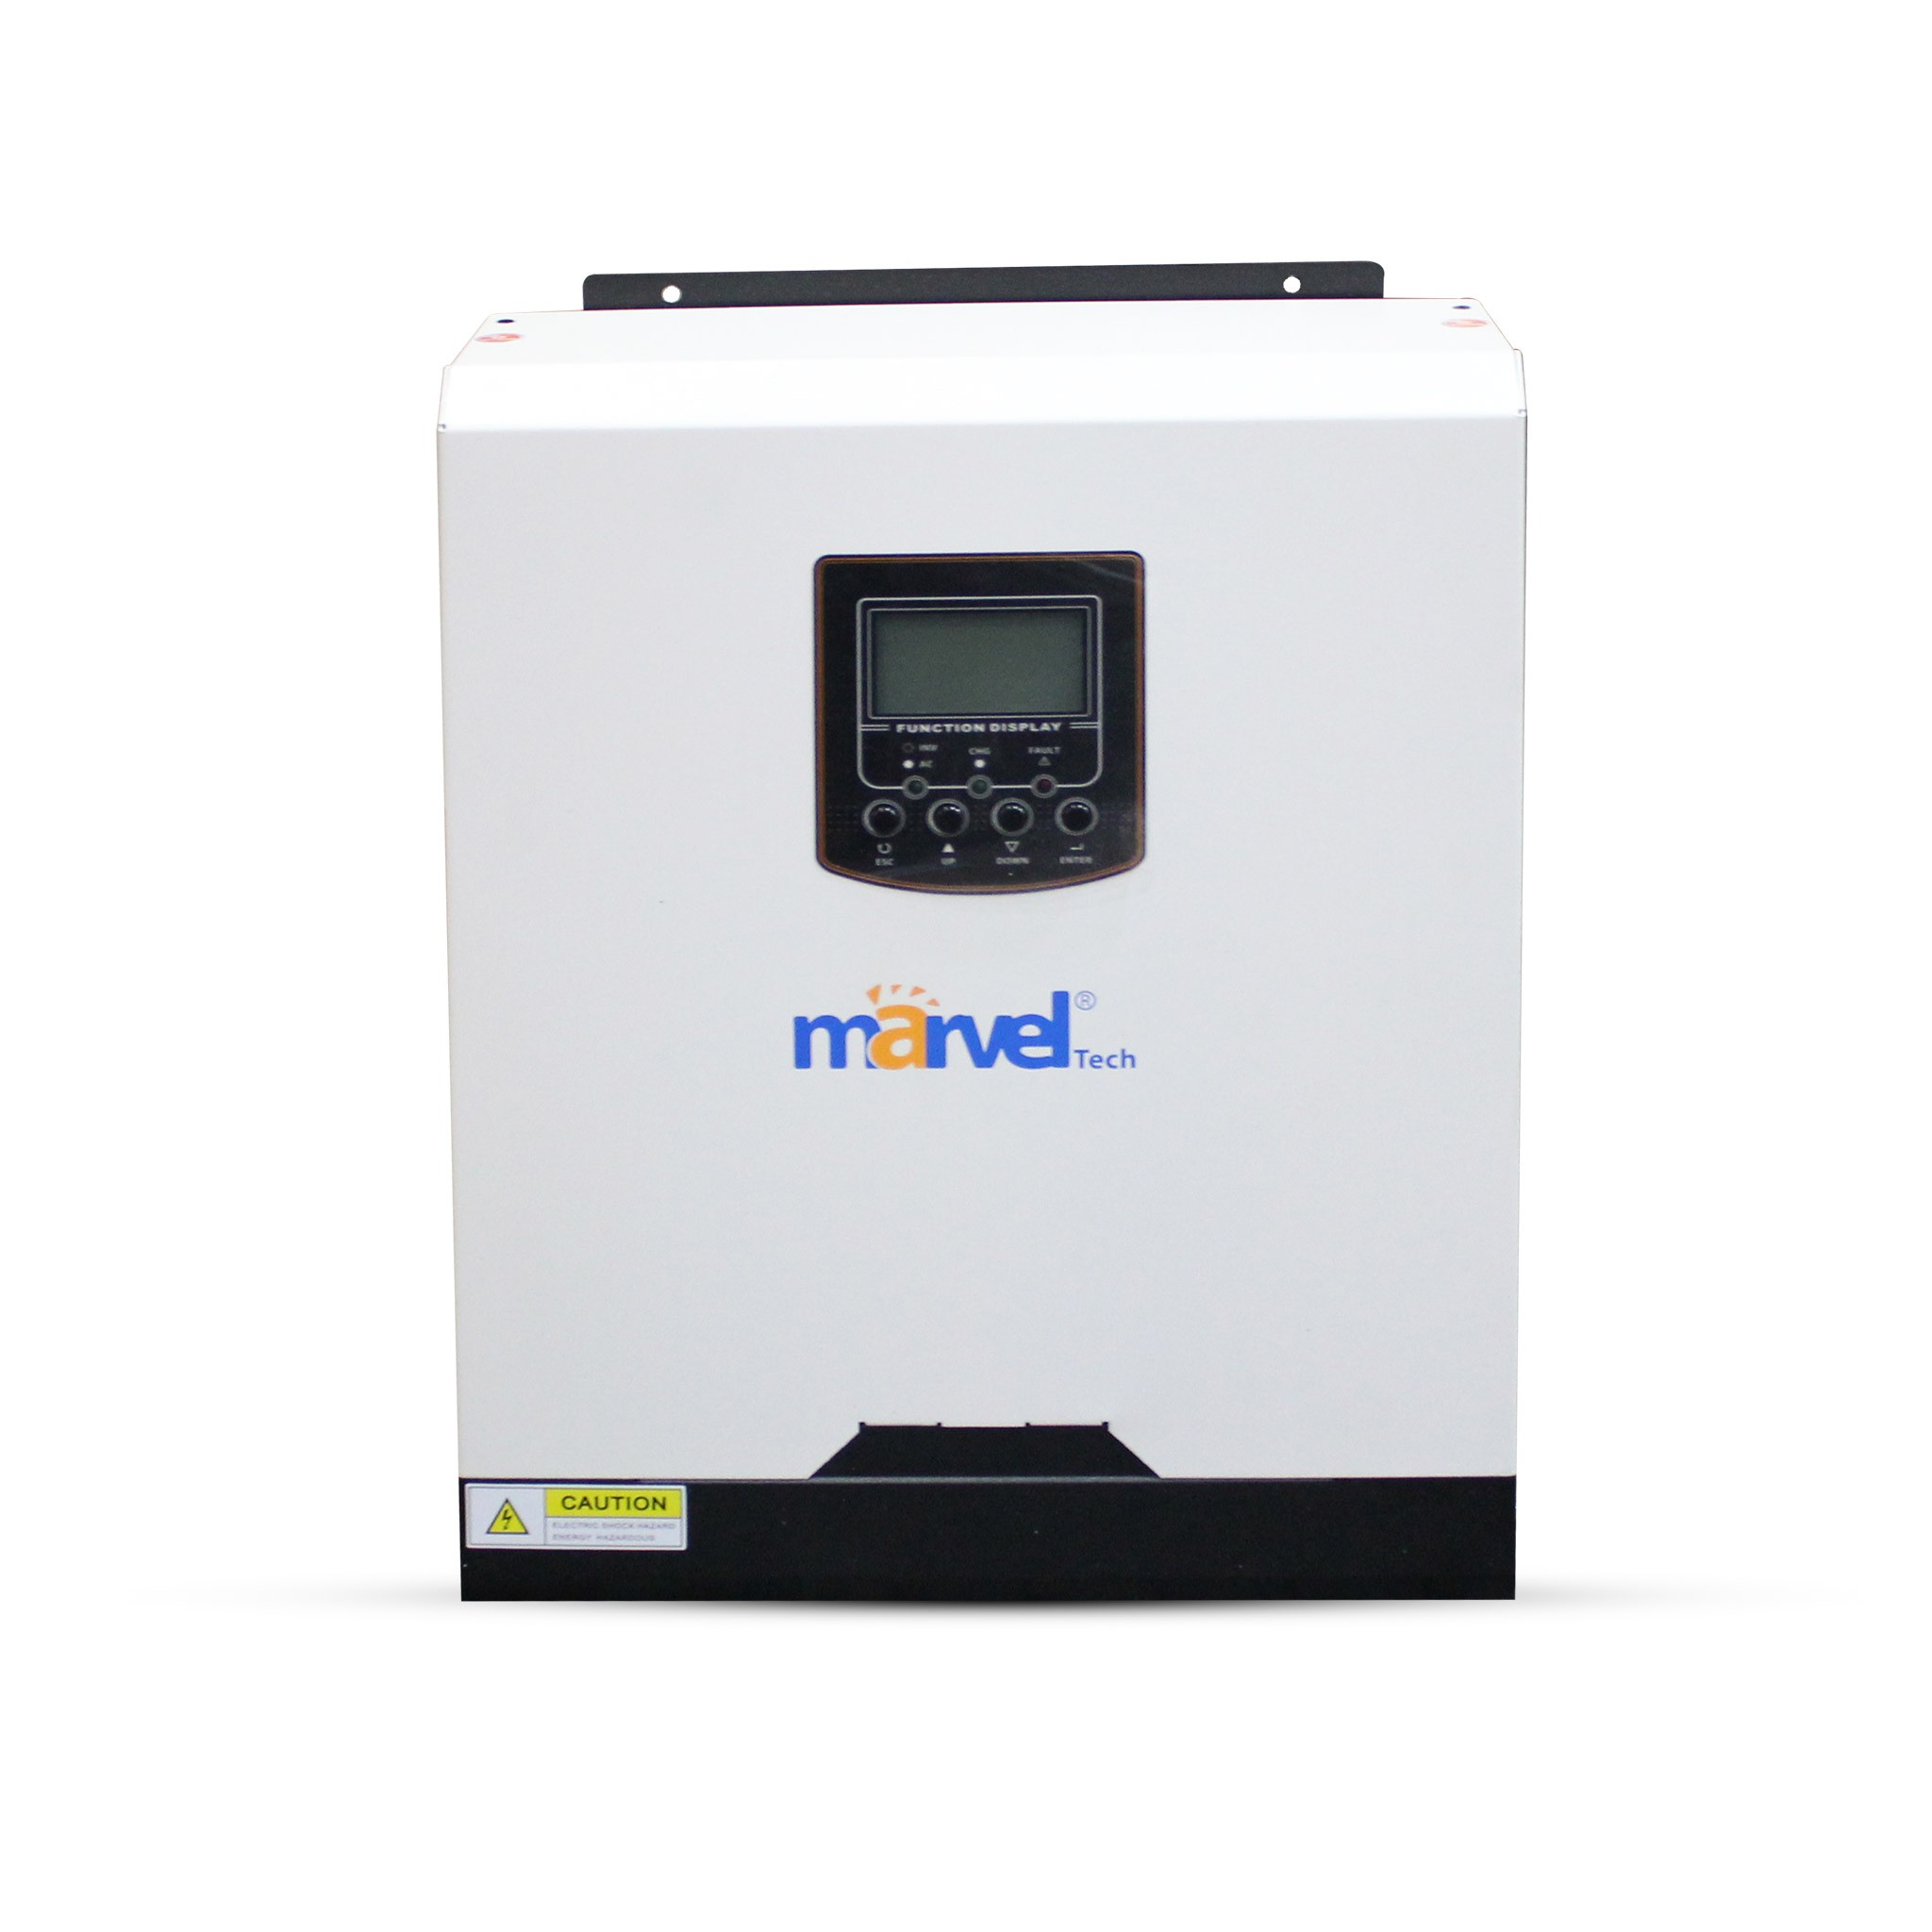 SOLAR INVERTER MARVEL-SOLAR 1200W/12 MPPT AXPERT VMII 1.2 KW  CHARGER 80A/12 PV100A MAX/ MPPT RANG 30 TO 300 / PVPOWER 2000W+WIFI واي فاي ,Inverters